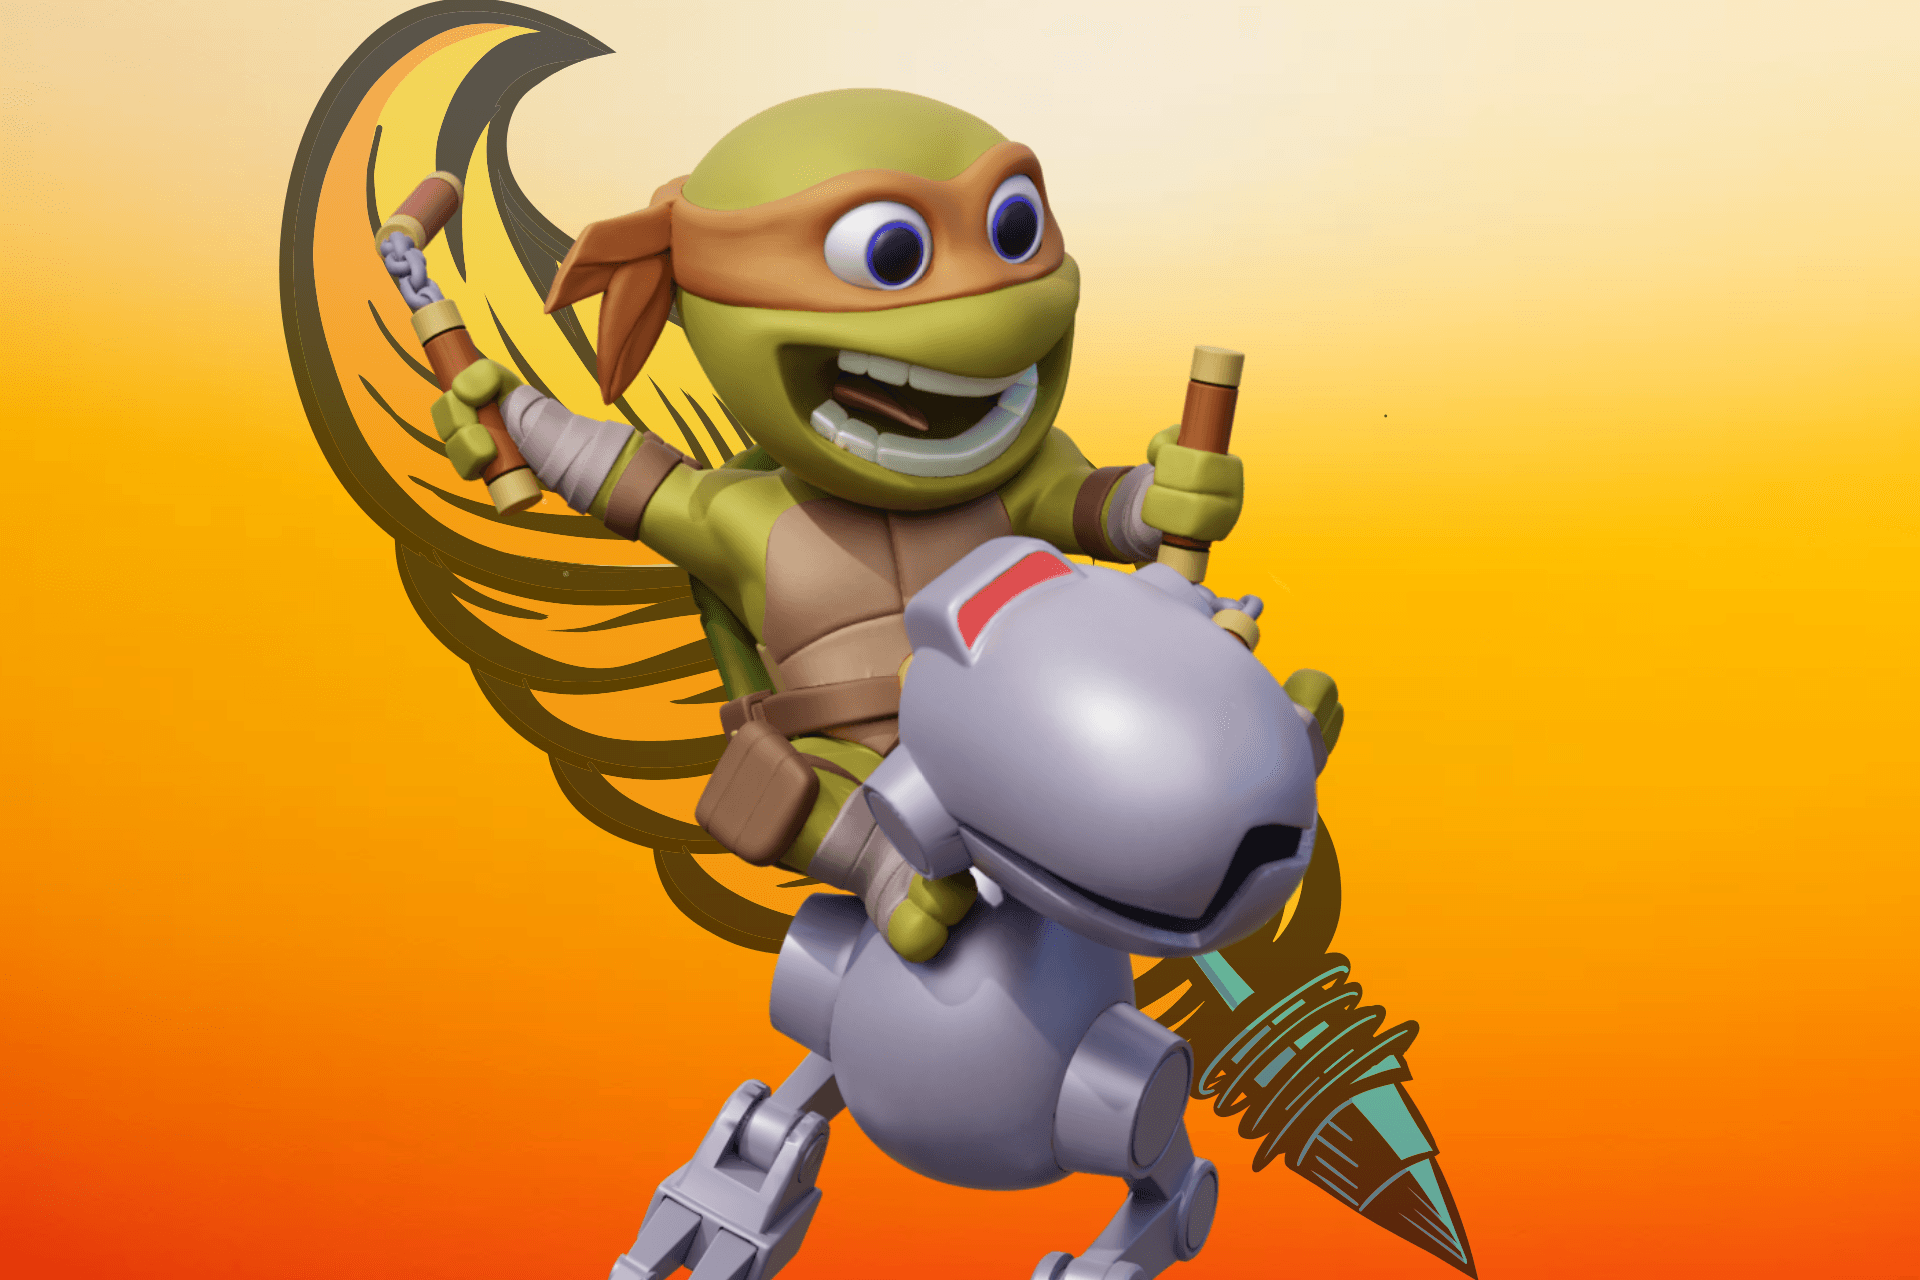 Shell Shocked: The Chibi Mikey Mouser Rider Joins the 3D Print Party